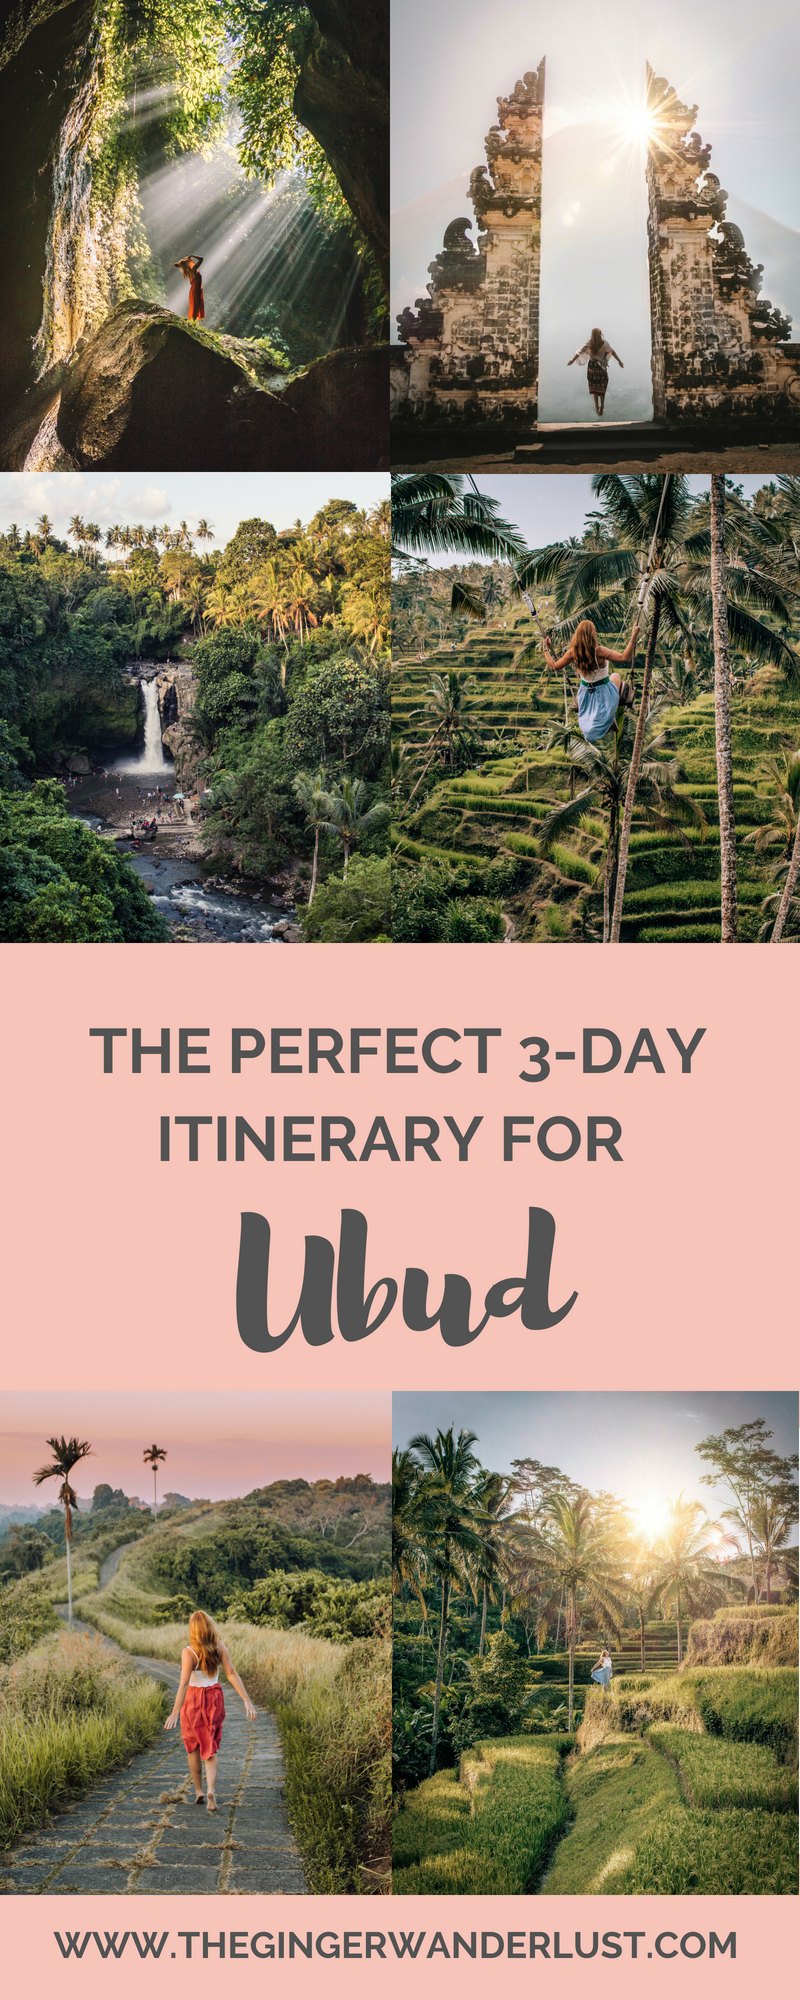 Top Things to do in Ubud, 3 day itinerary with all my top tips. Unmissable locations and instagrammable spots to visit in Ubud, Bali.